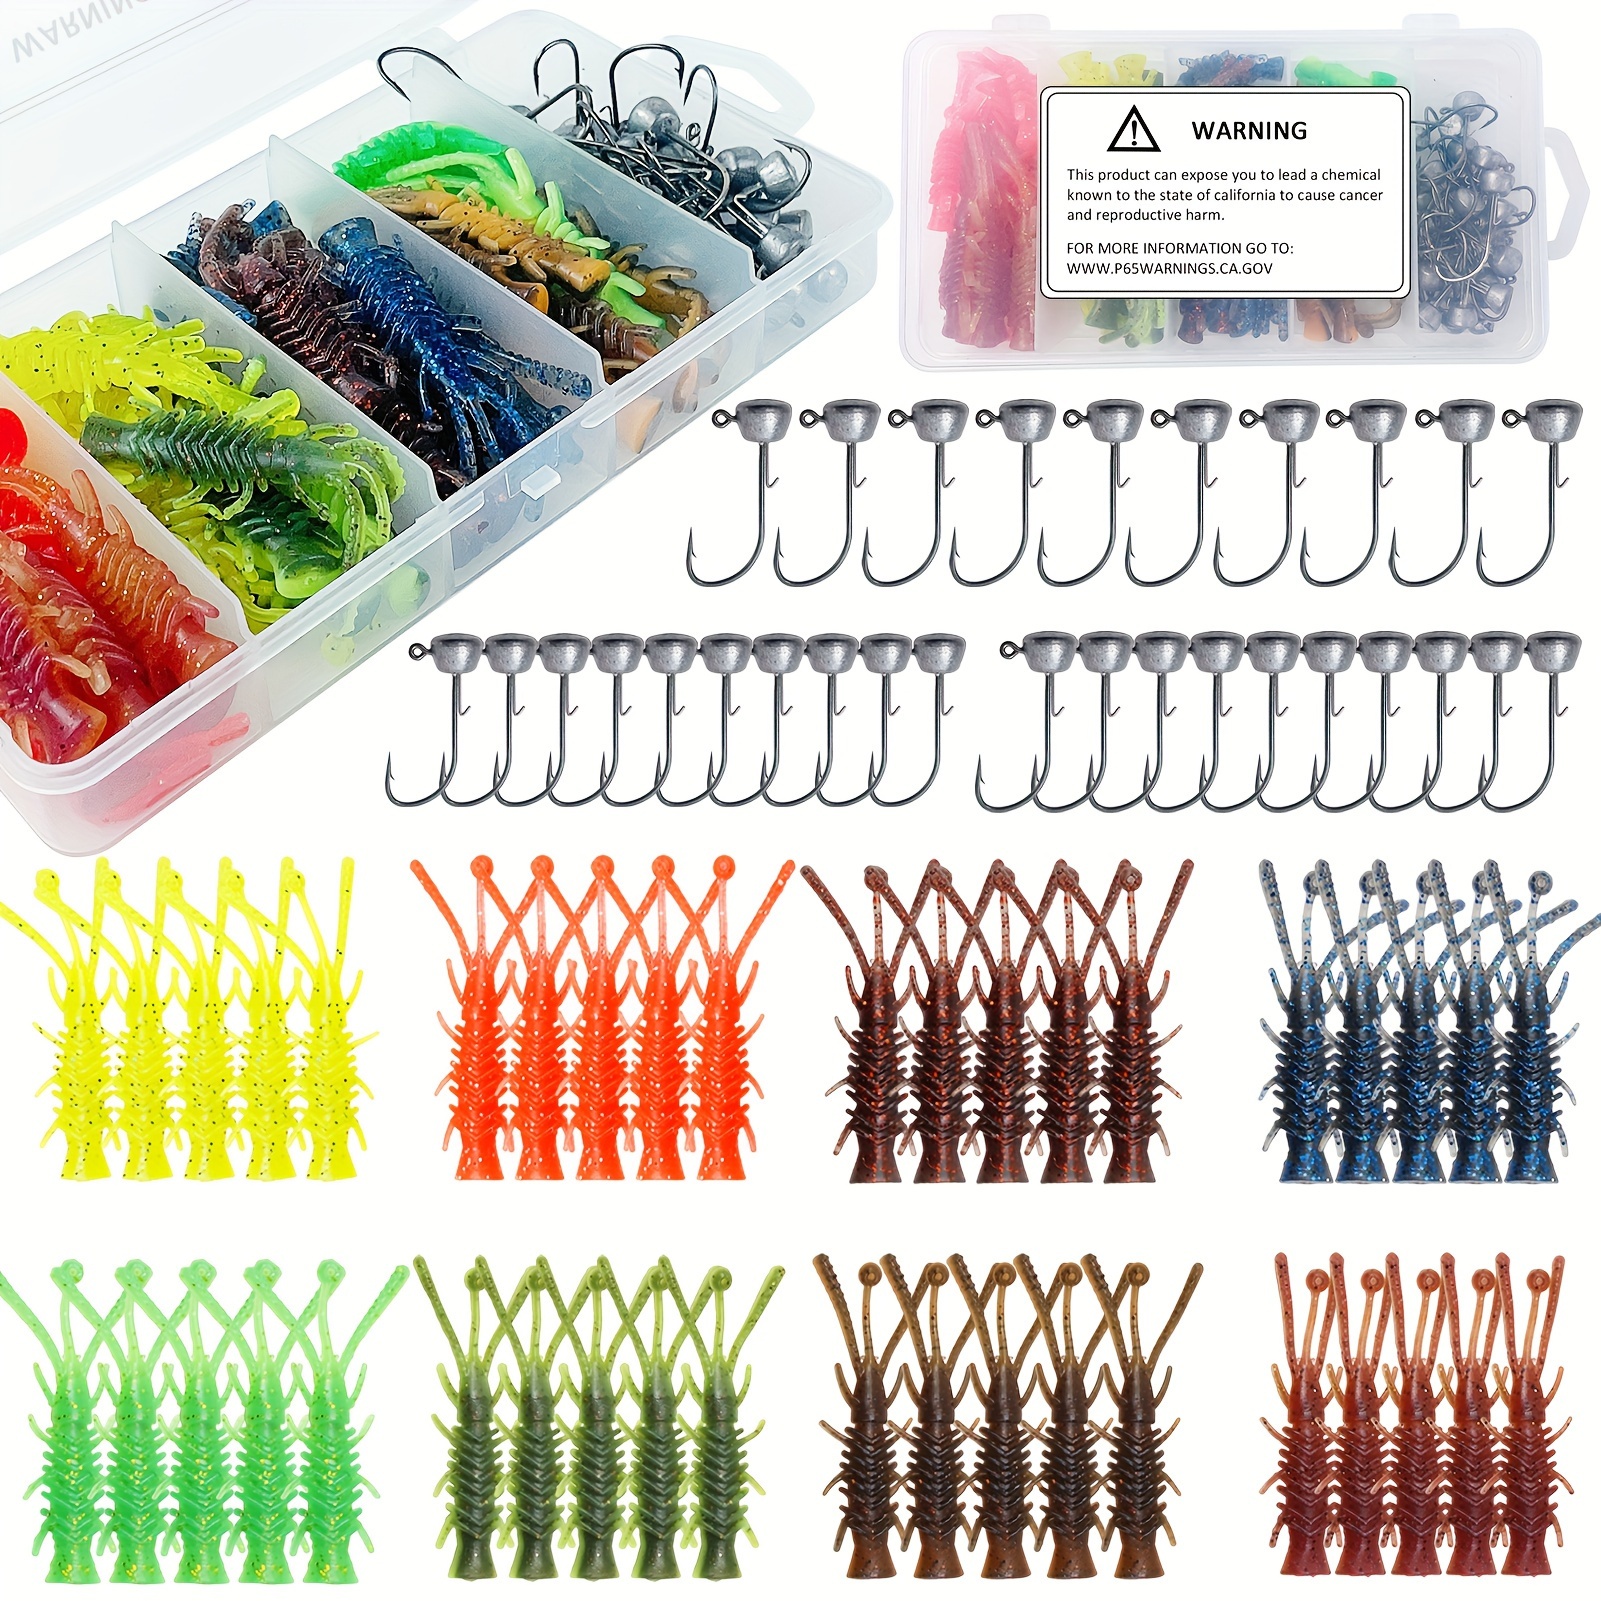 

71pcs Ned Rig Jig Heads With Hellgrammite Soft Plastic Fishing Lures Kit, Mushroom Head Ned Rig Super Realistic Soft Plastic Lures For Bass Trout Pike Walleye Crappie Saltwater Freshwater